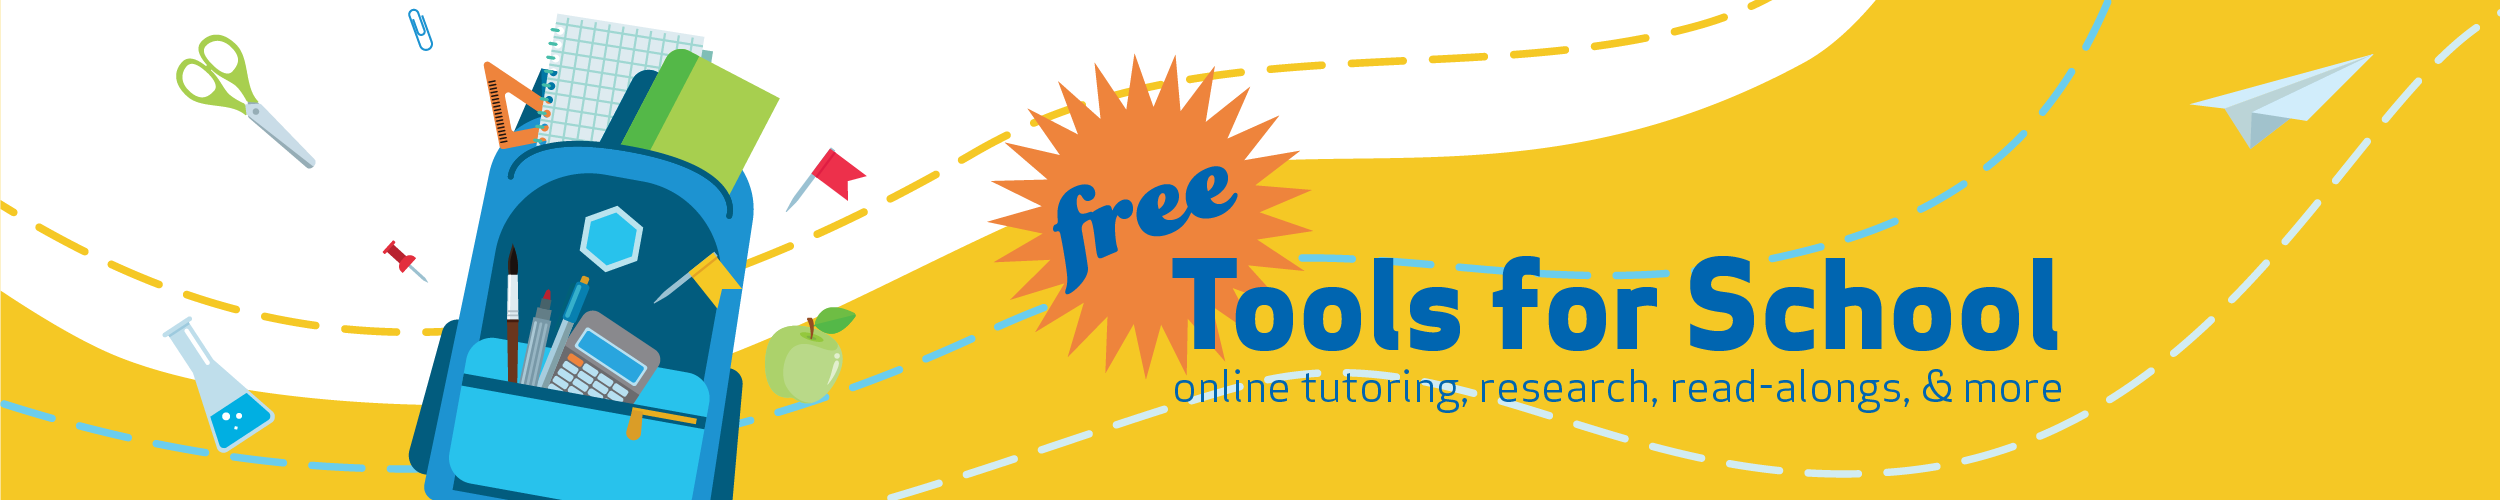 Free Tools for School: online tutoring, research, read-alongs, & more